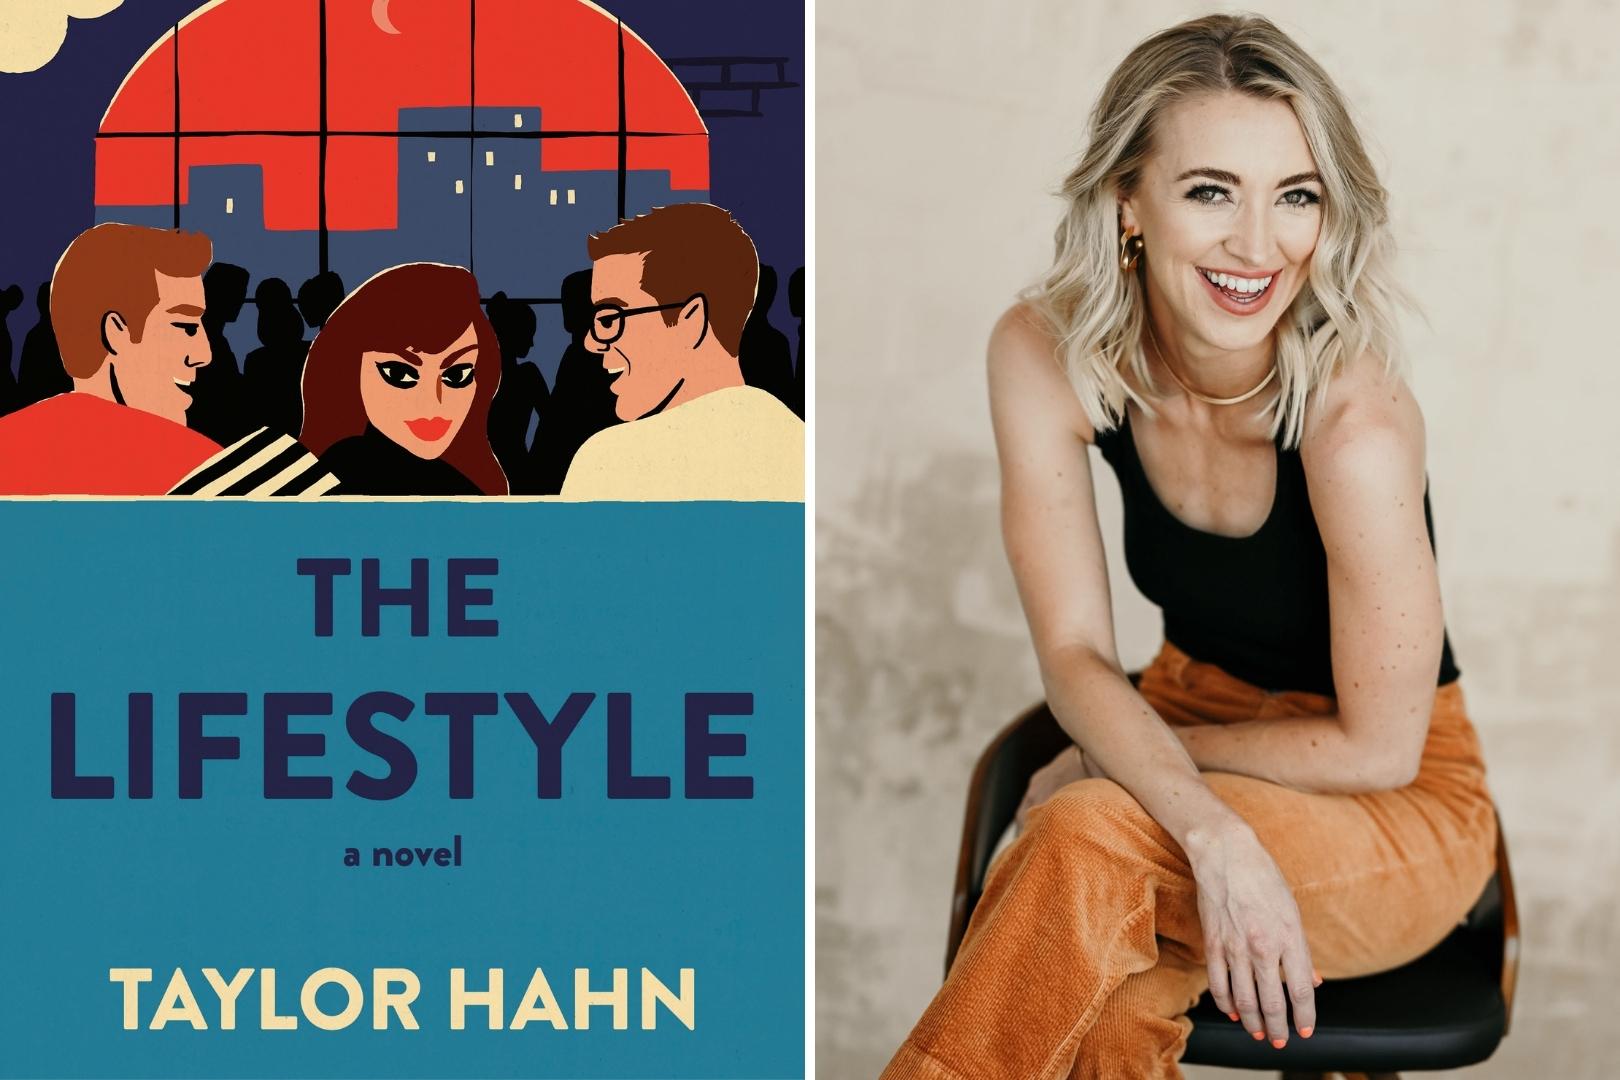 Q&A with Taylor Hahn, Author of The Lifestyle